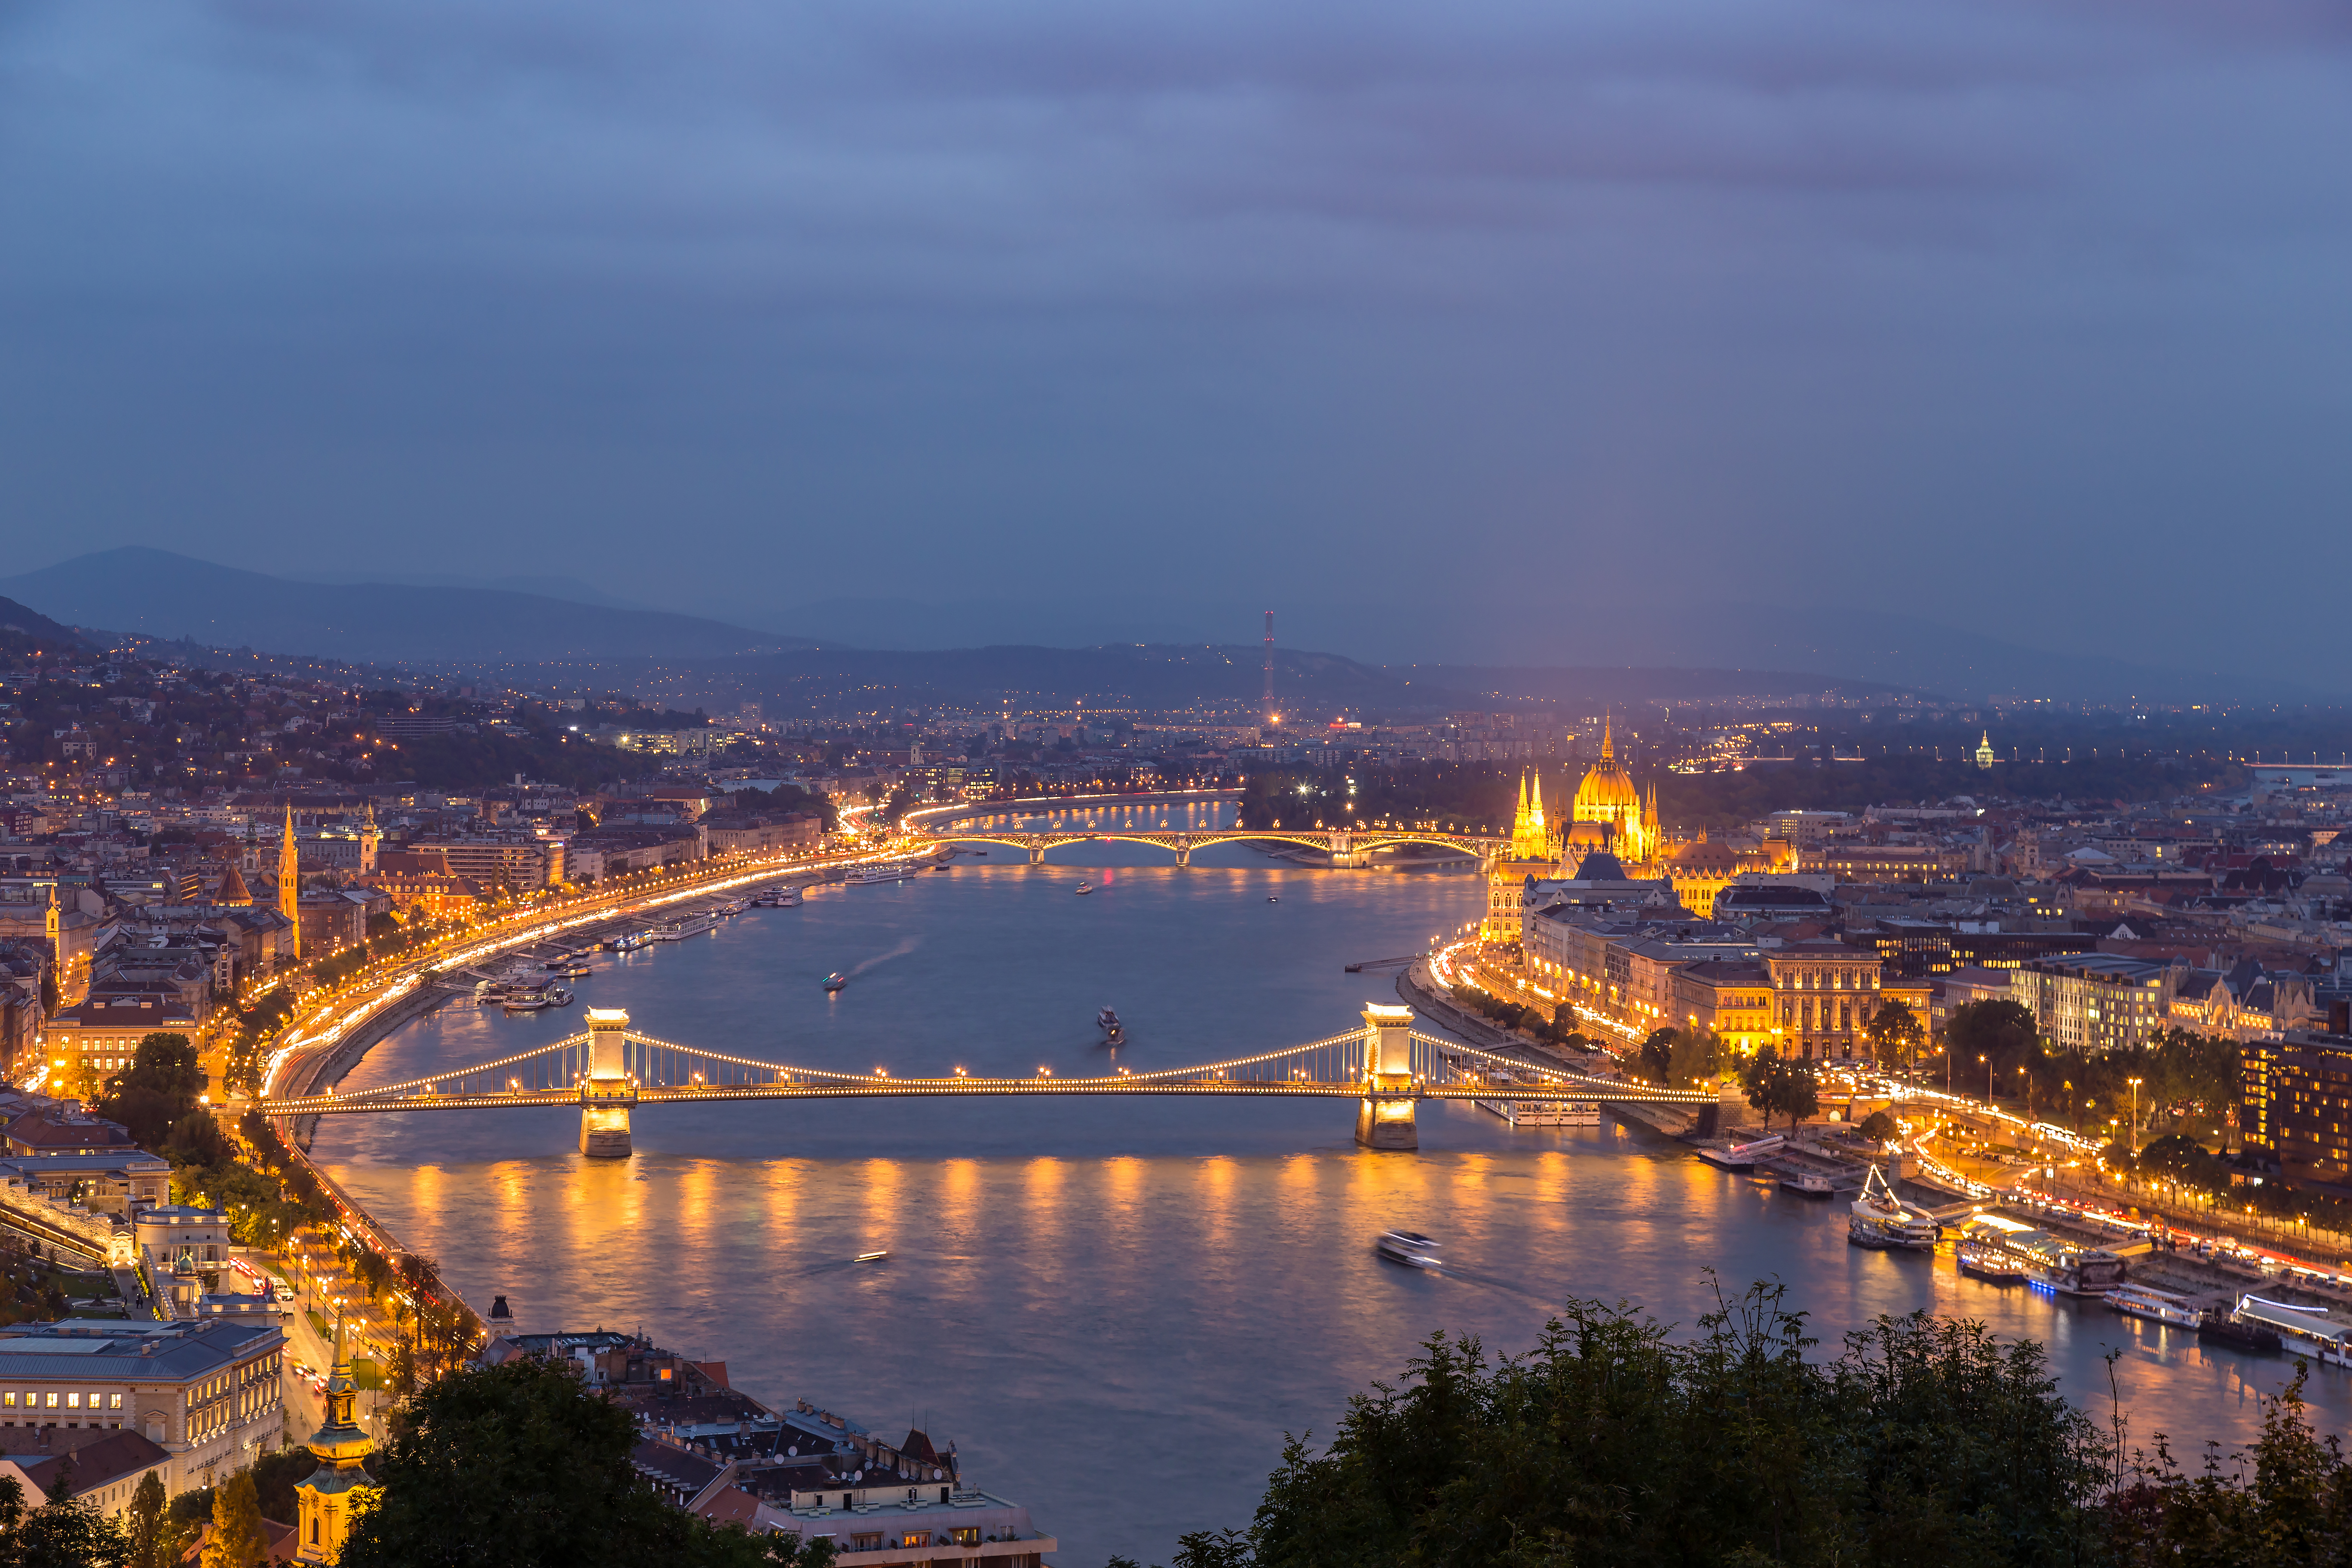 Night view of Danube river and Budapest